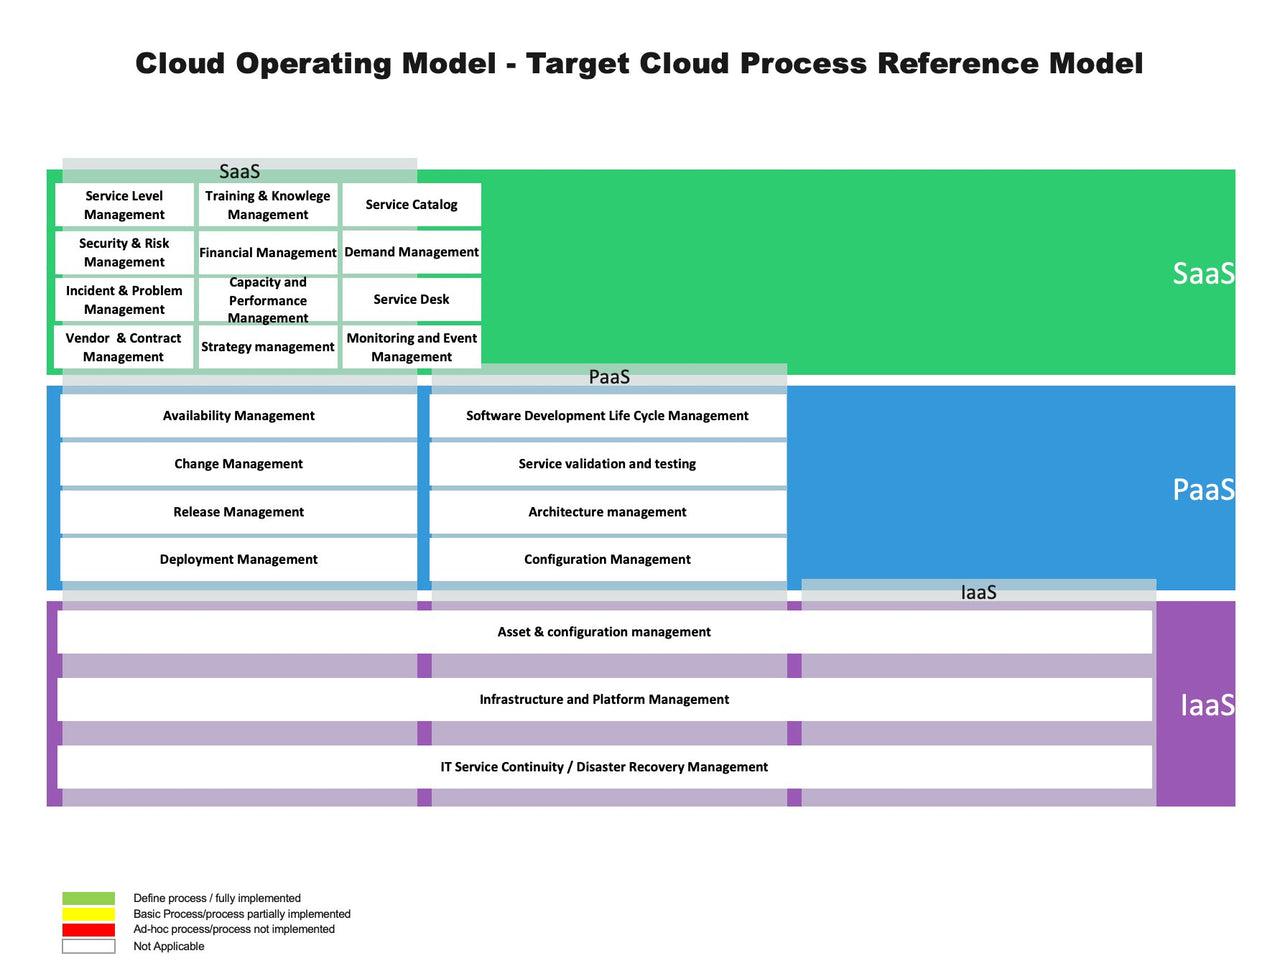 Cloud Migration Strategy Toolkit - itQMS